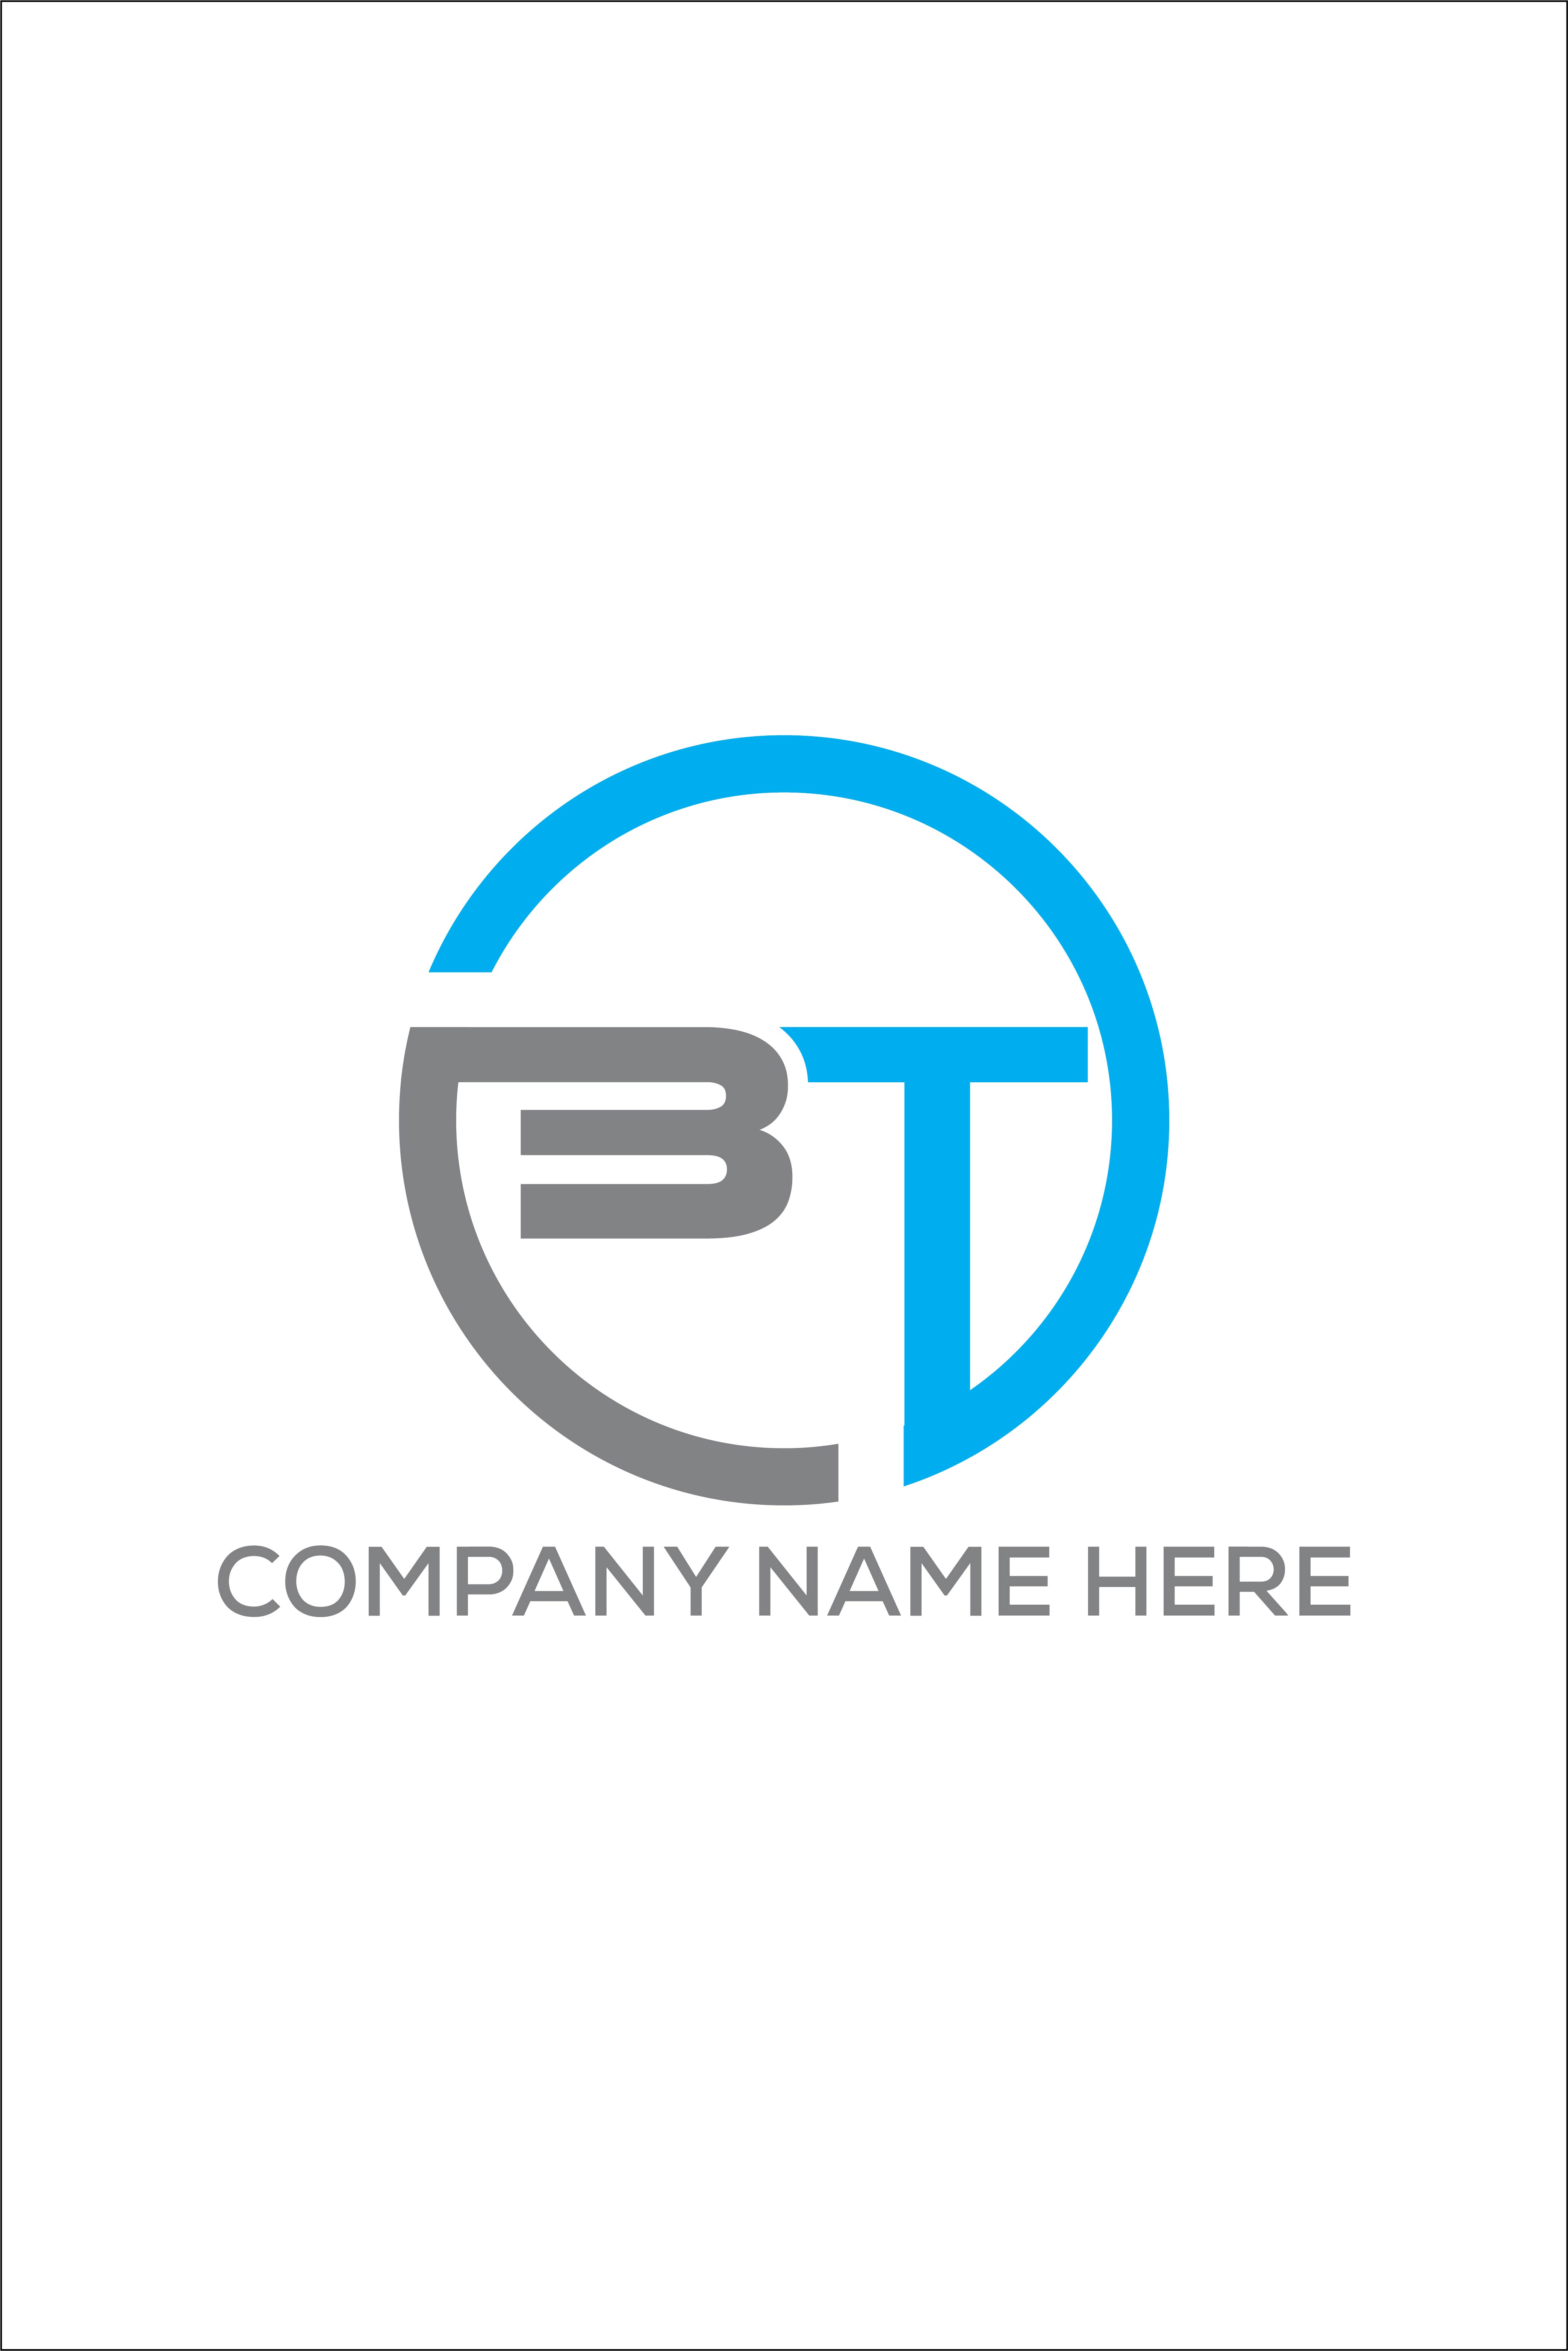 Letter BT Logo or Icon Design Vector Image Template pinterest preview image.